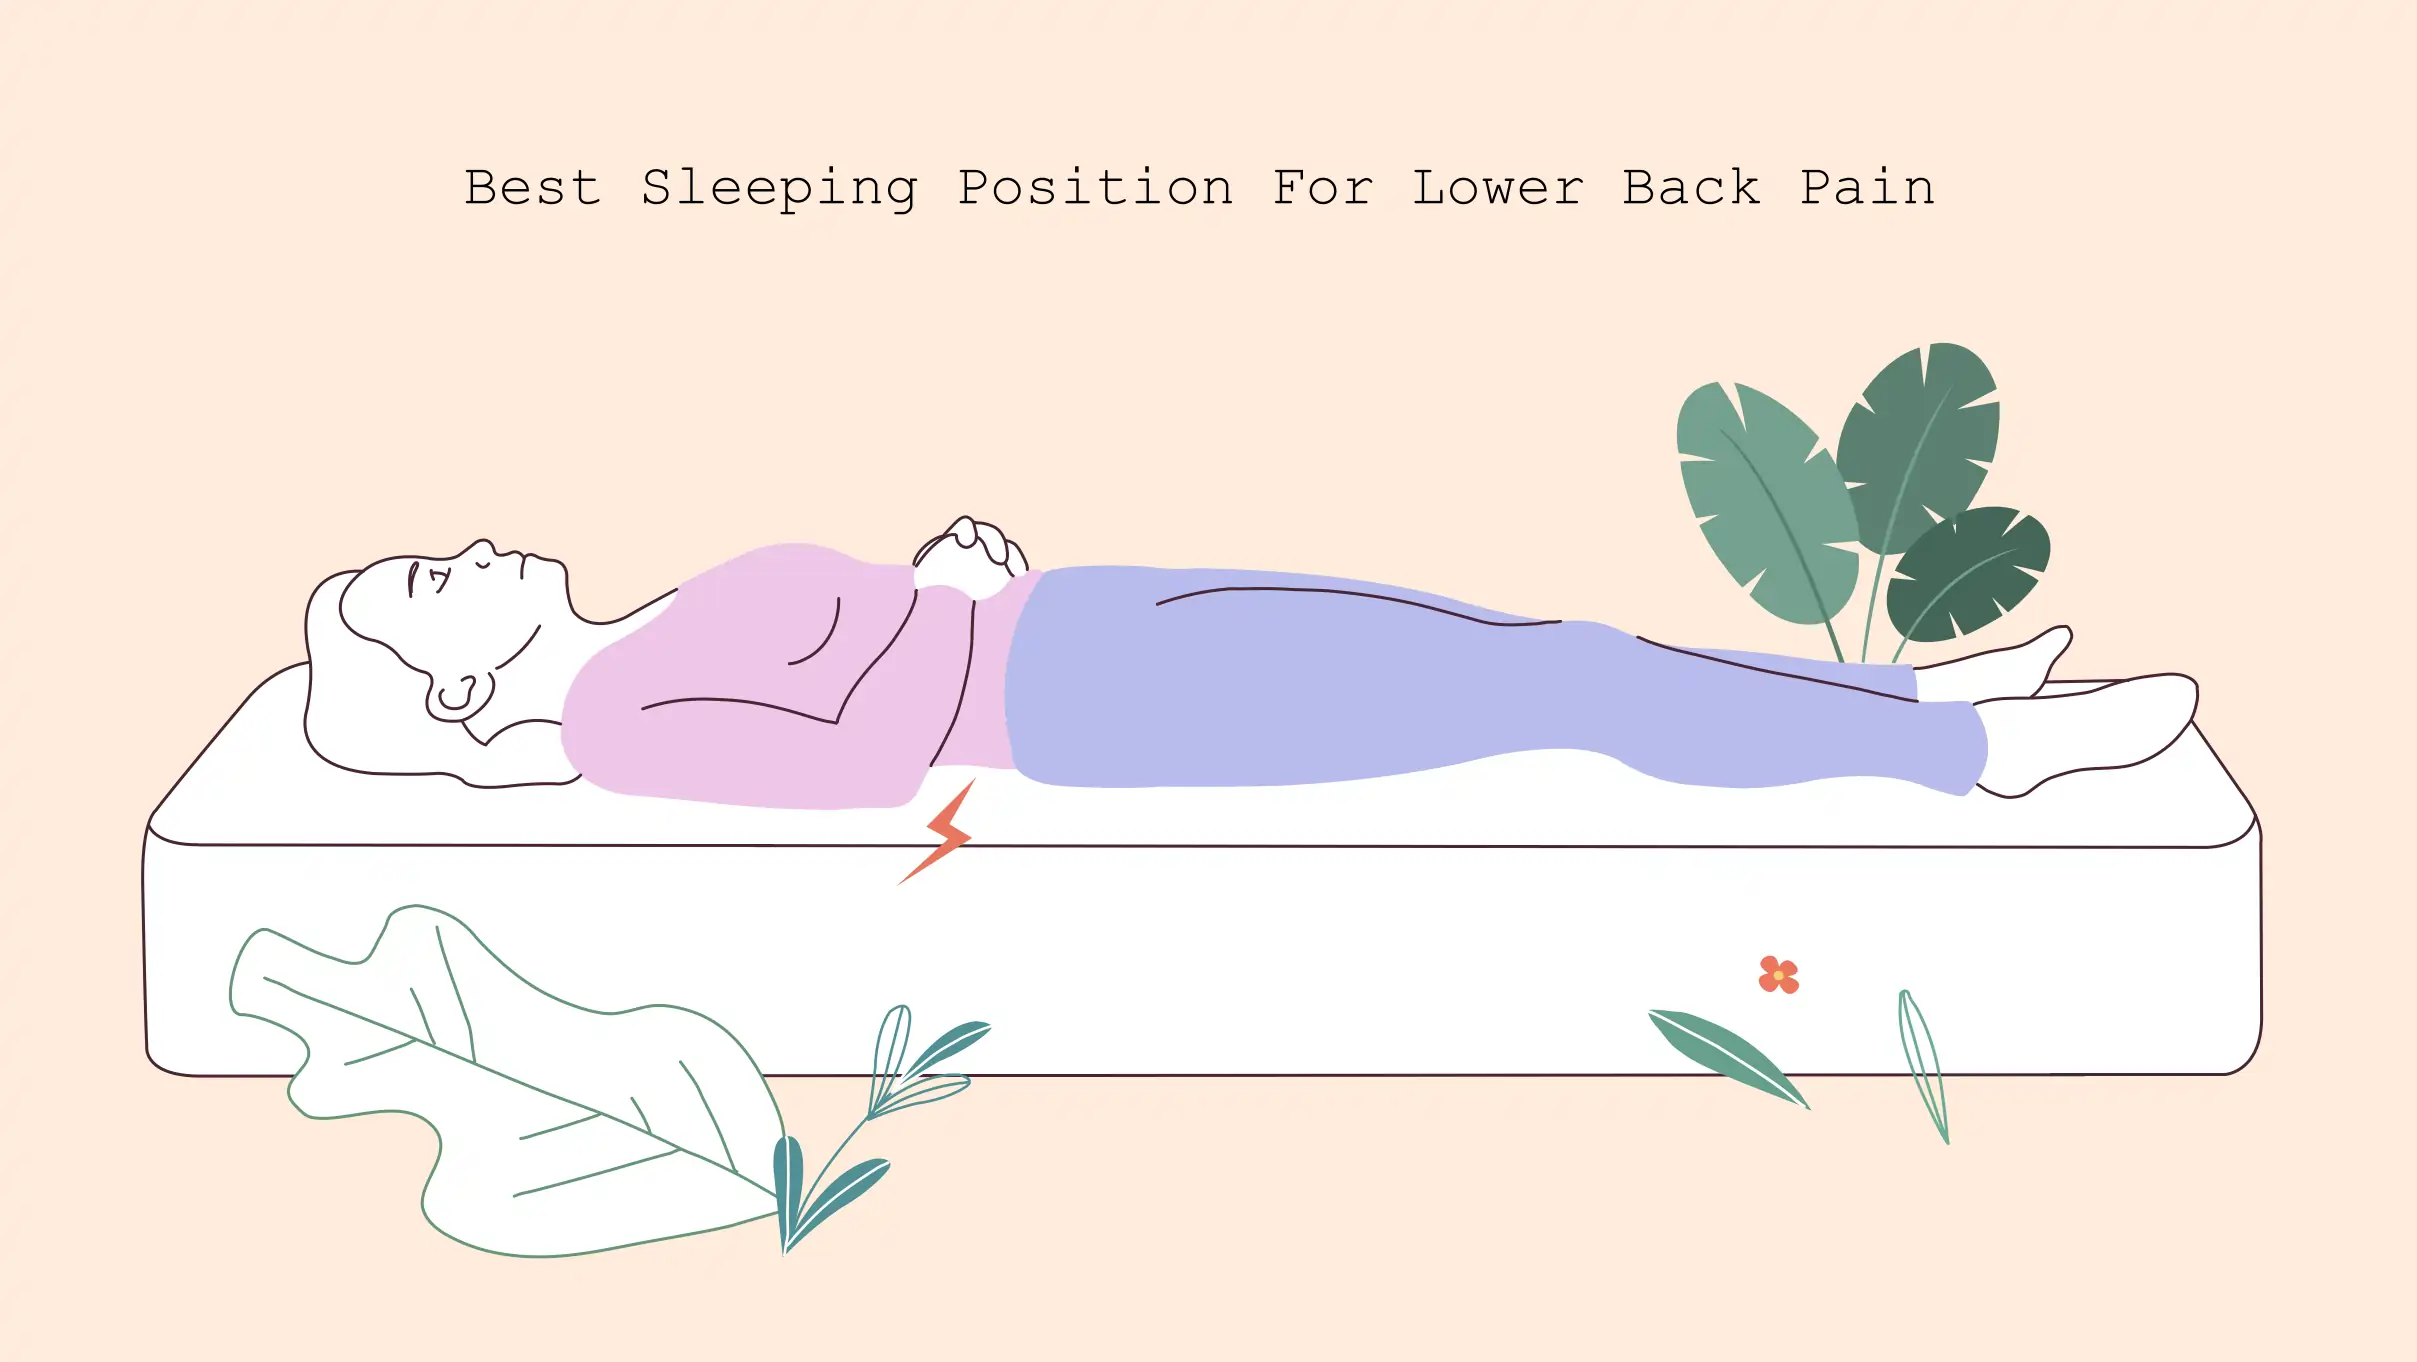 Best Sleeping Positions for Lower Back Pain - How to Sleep With